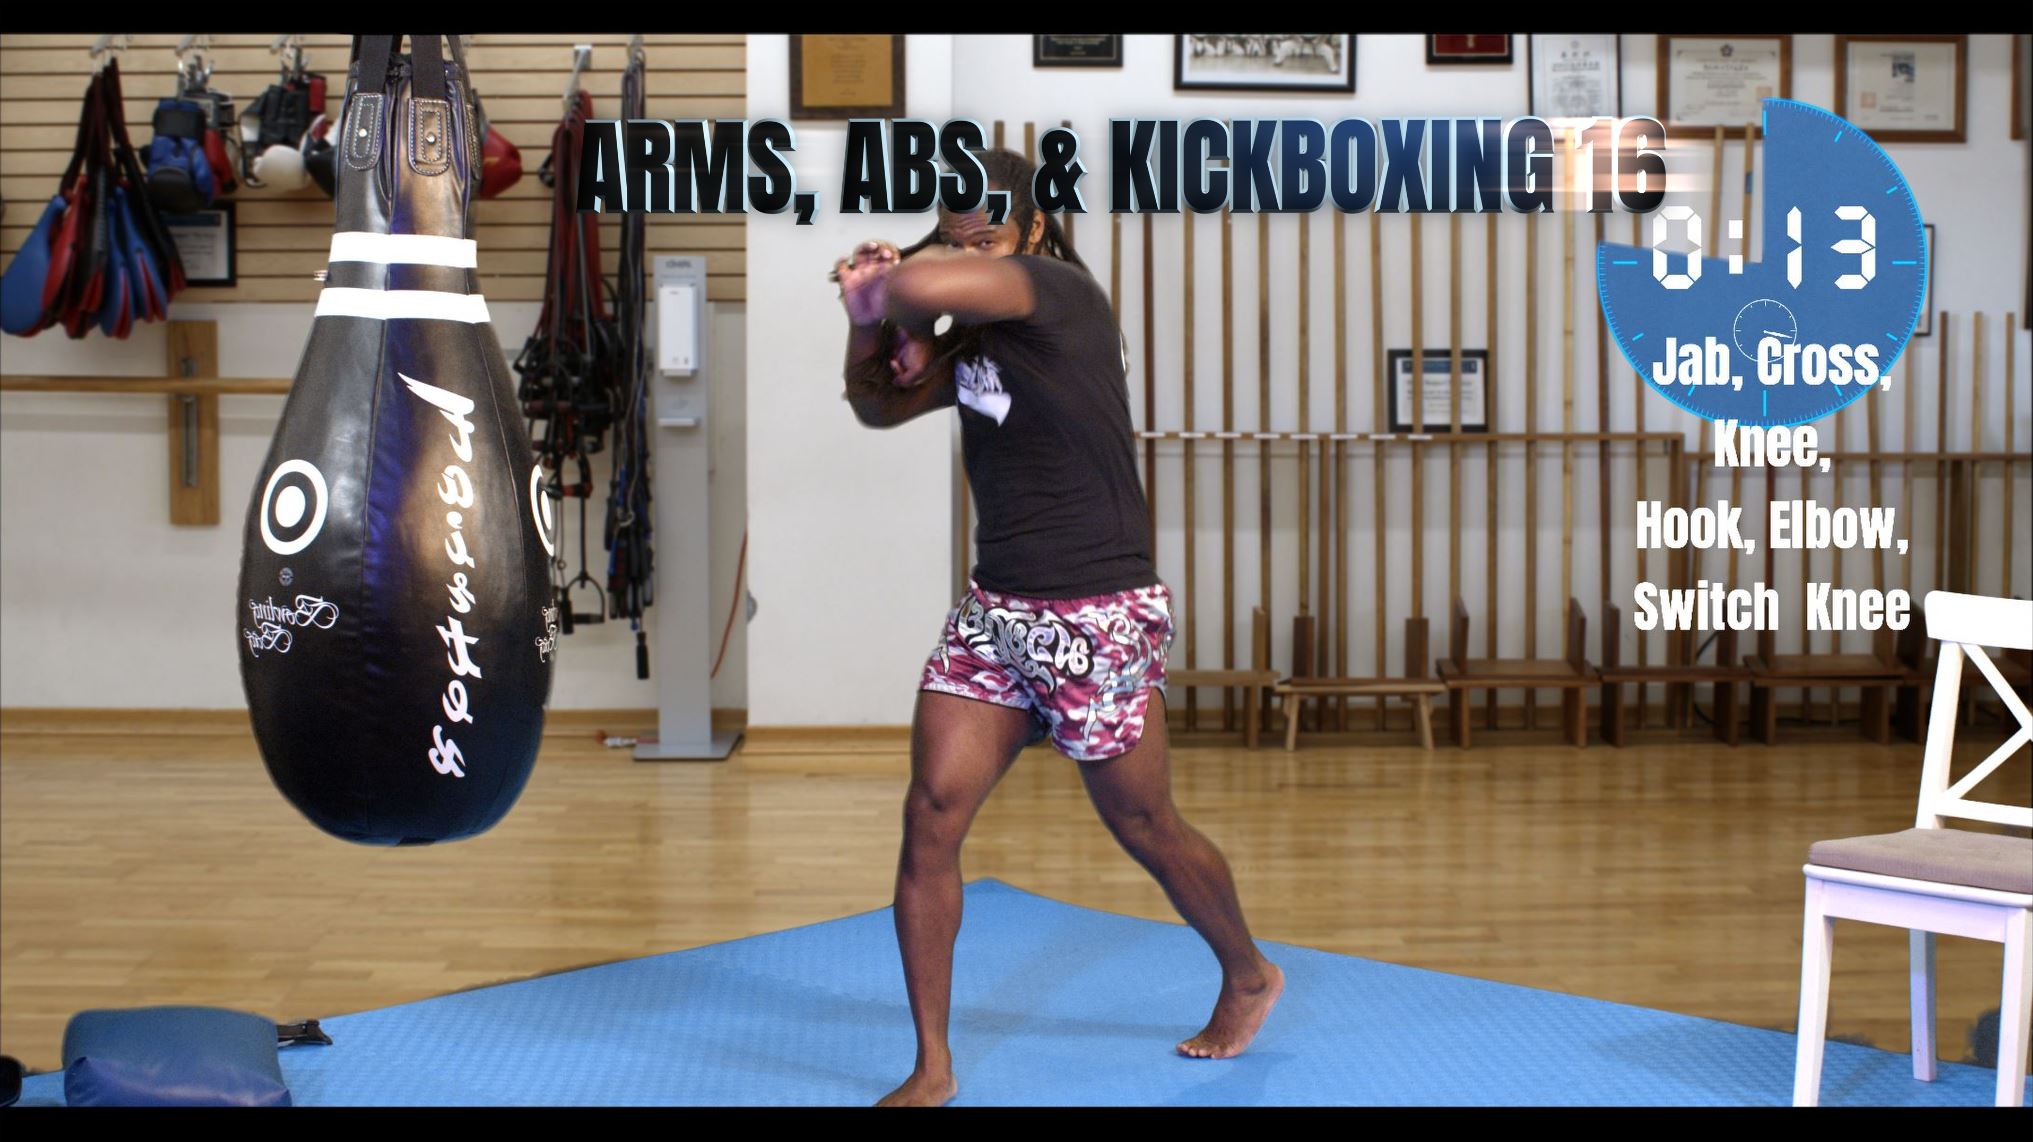 Arms and Abs/ Kickboxing 16